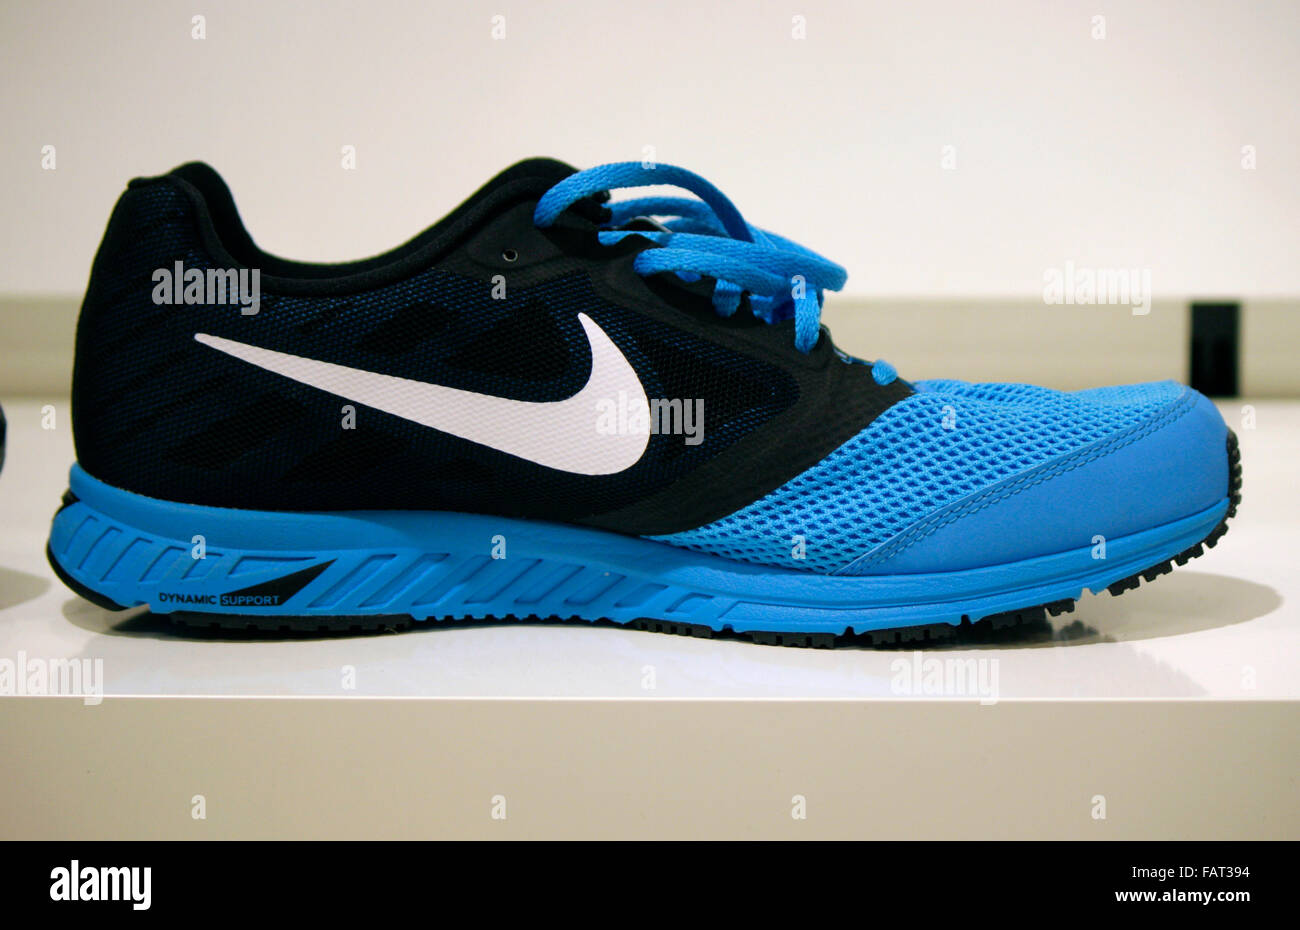 Nike shoe stock photography and images - Alamy